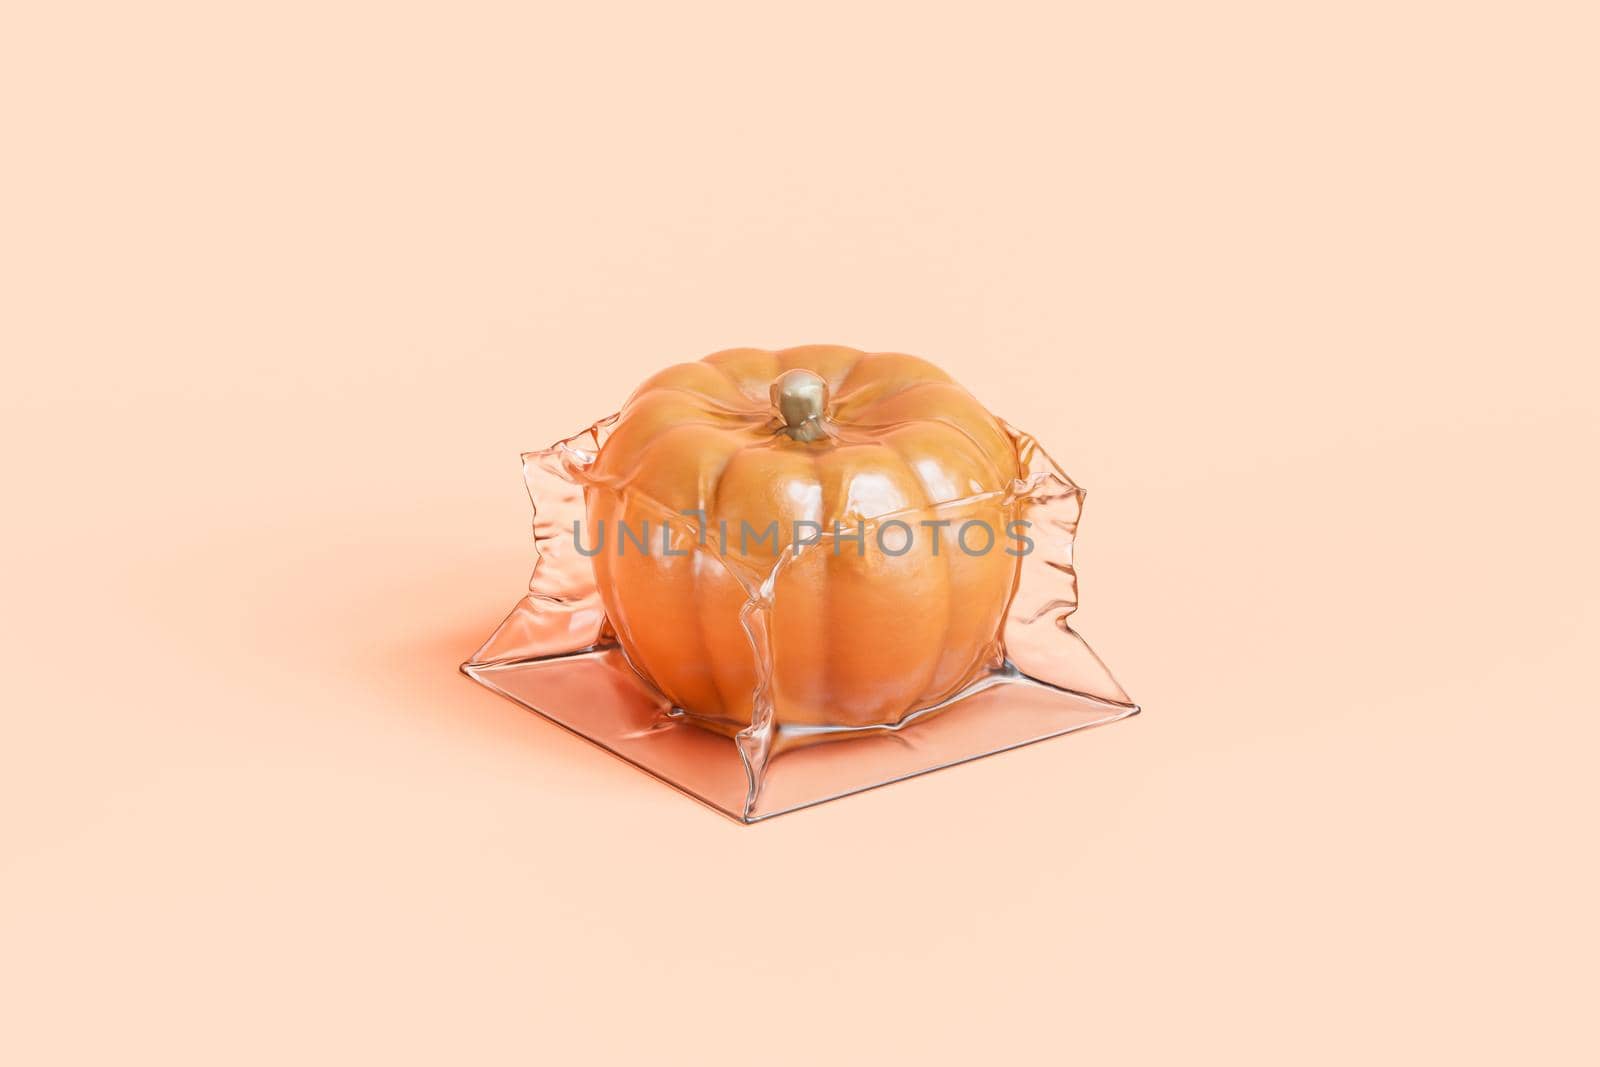 Pumpkin in vacuum packaging on beige background for advertising on autumn holidays or sales, 3d render by Frostroomhead